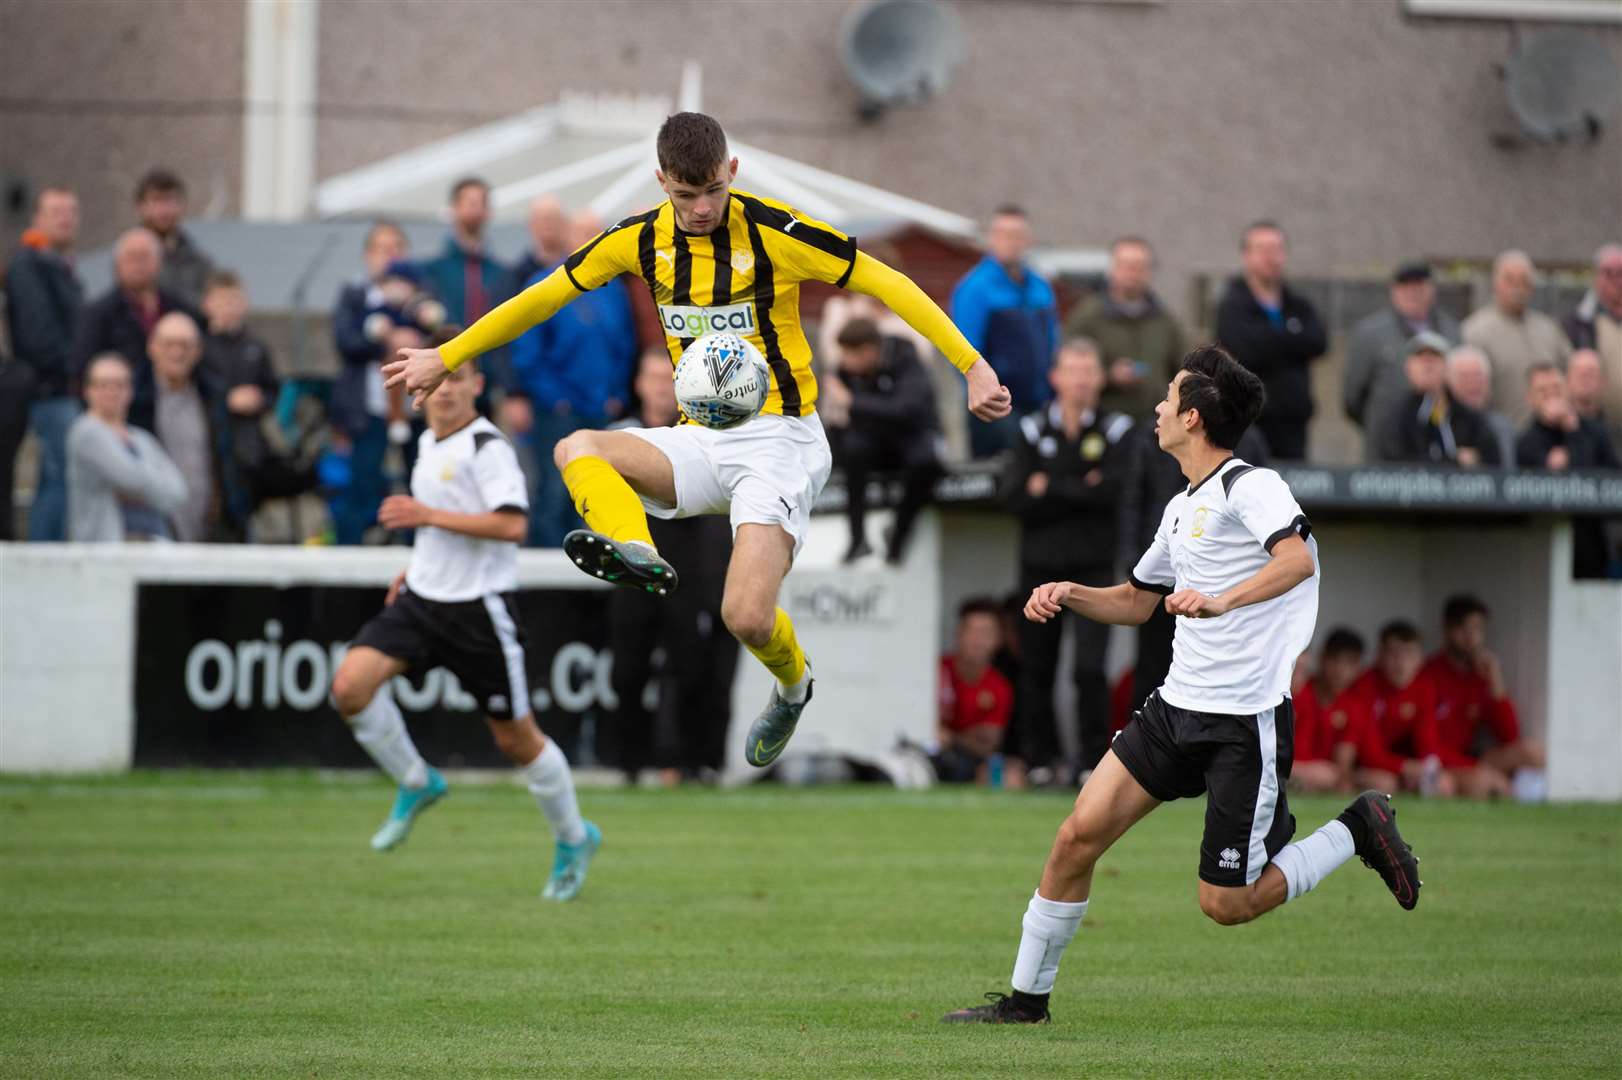 Nairn striker Dylan Mackenzie collects the ball in mid flight during last year's William Hill Scottish Cup fixture between Clachnacuddin and Nairn County.